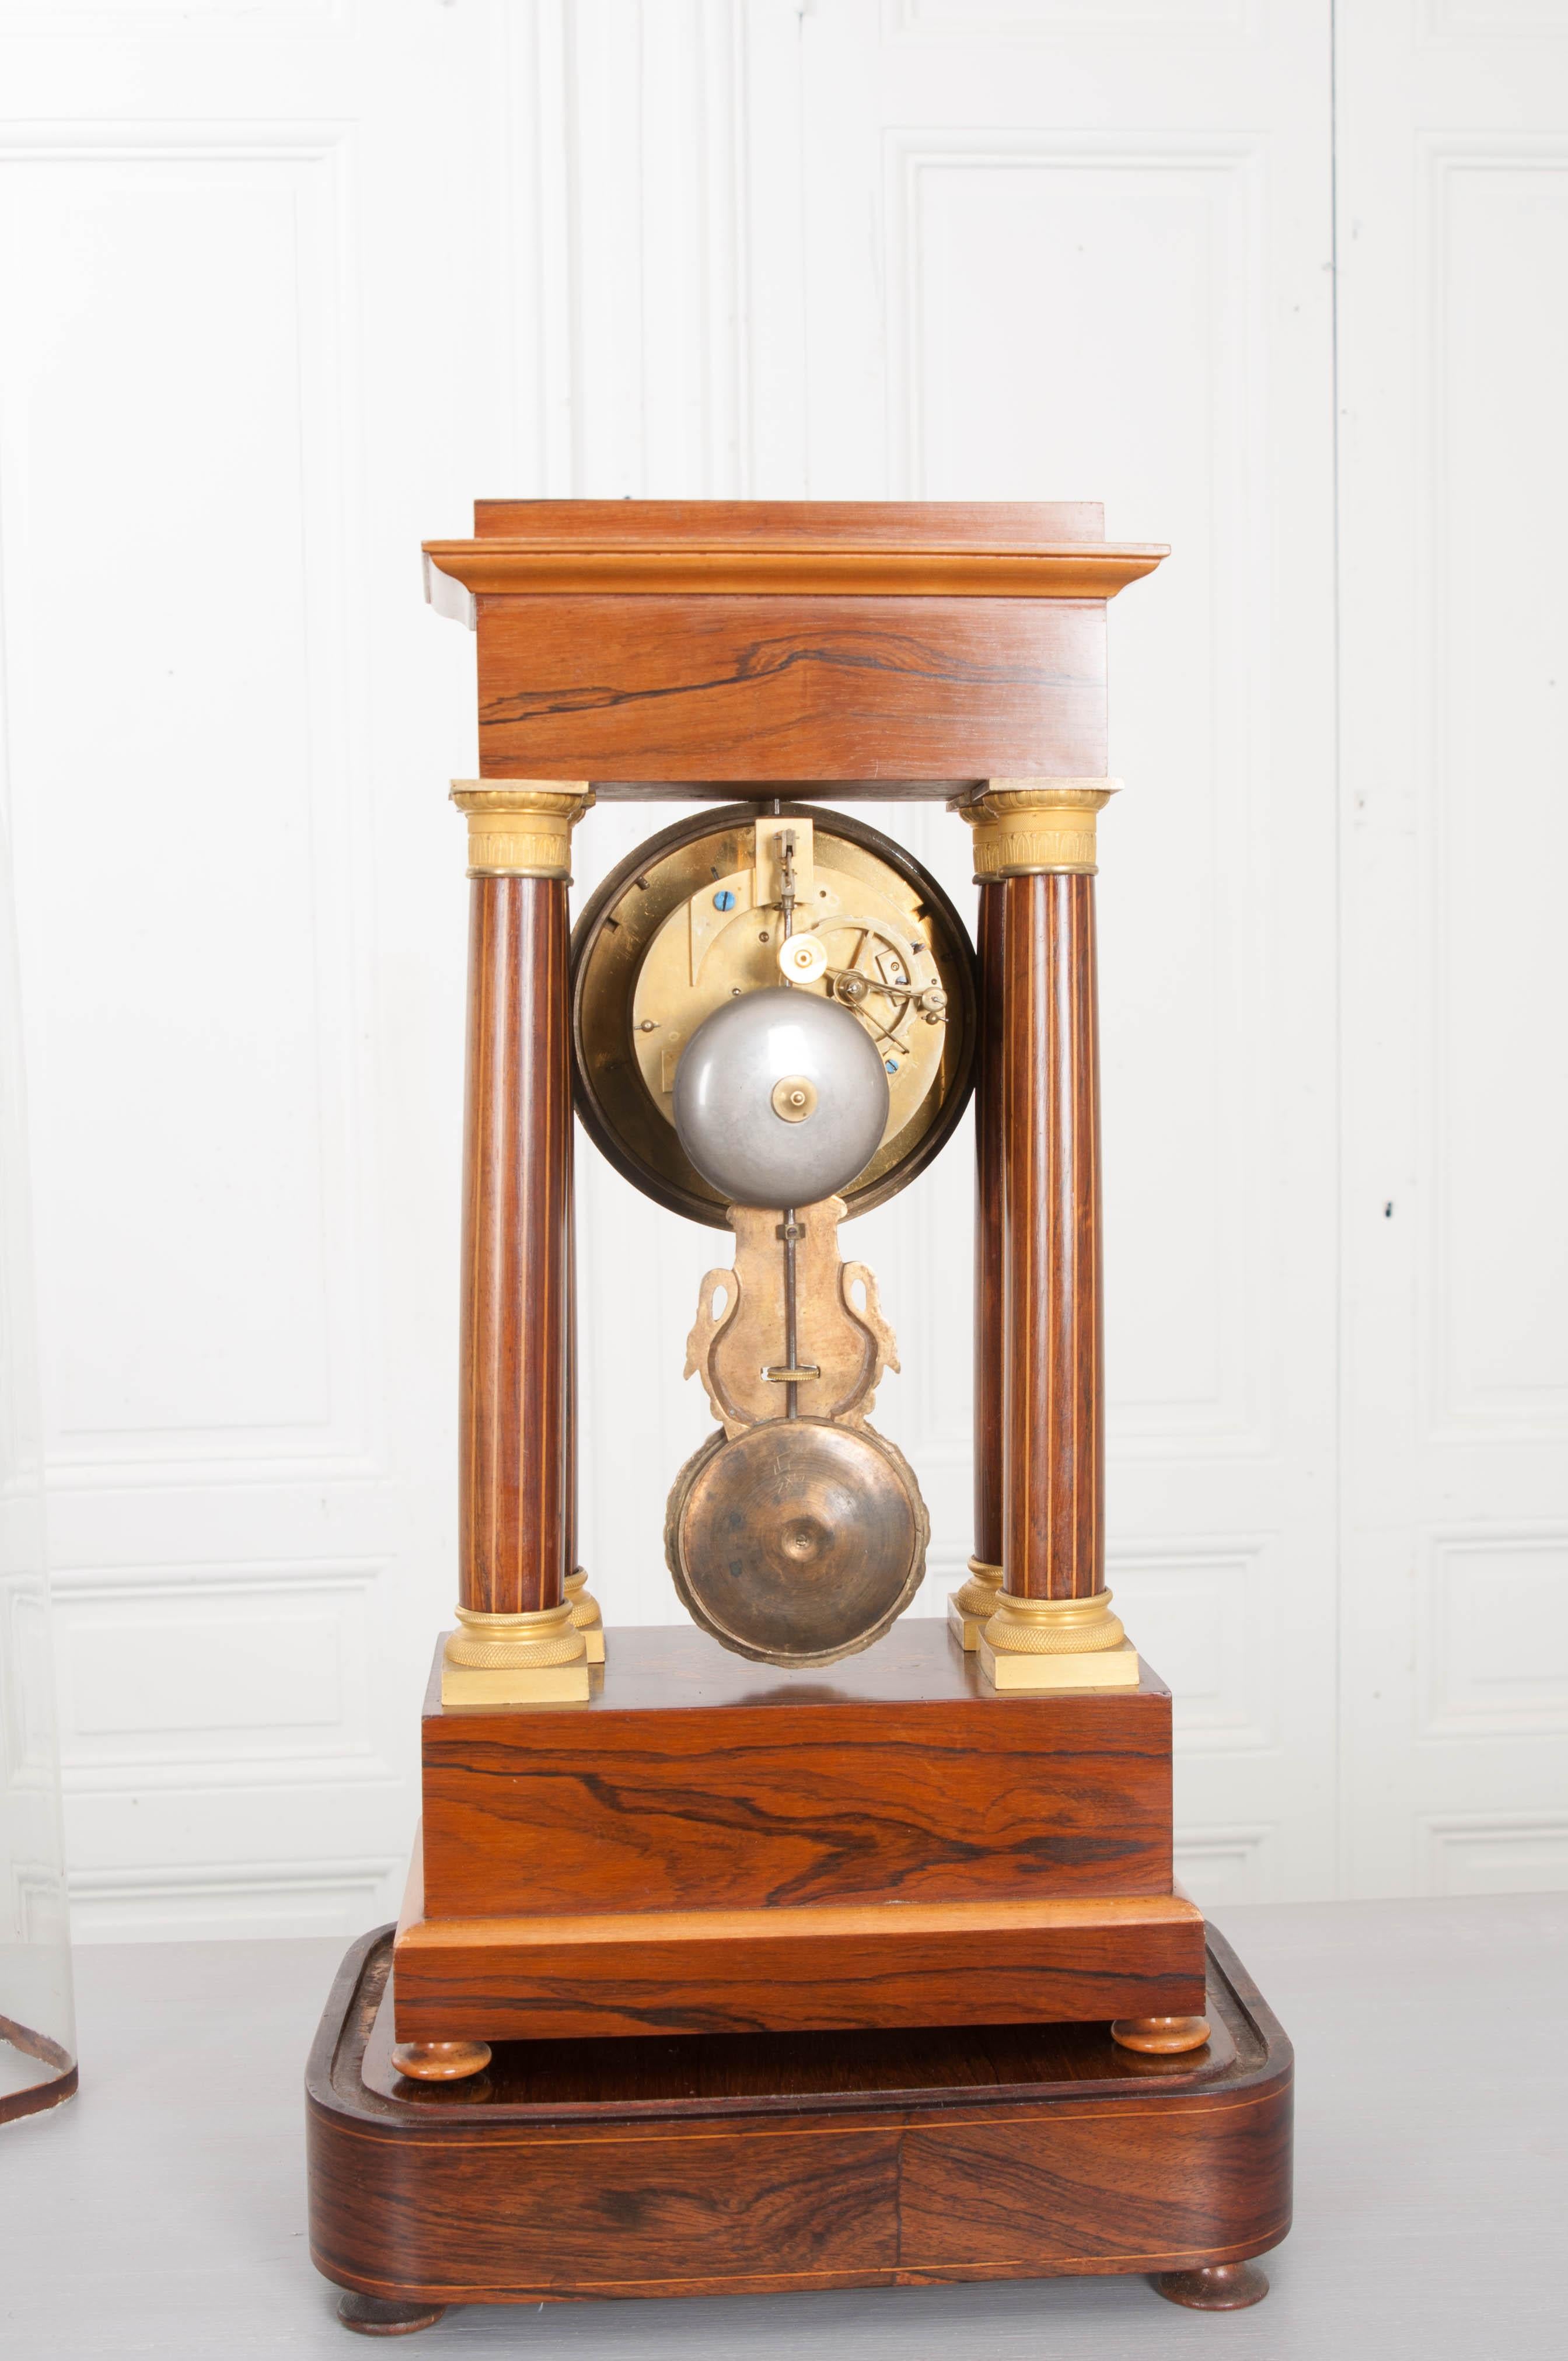 Fine 19th Century Marquetry-Inlaid Satinwood and Gilt-Bronze Portico Clock For Sale 6